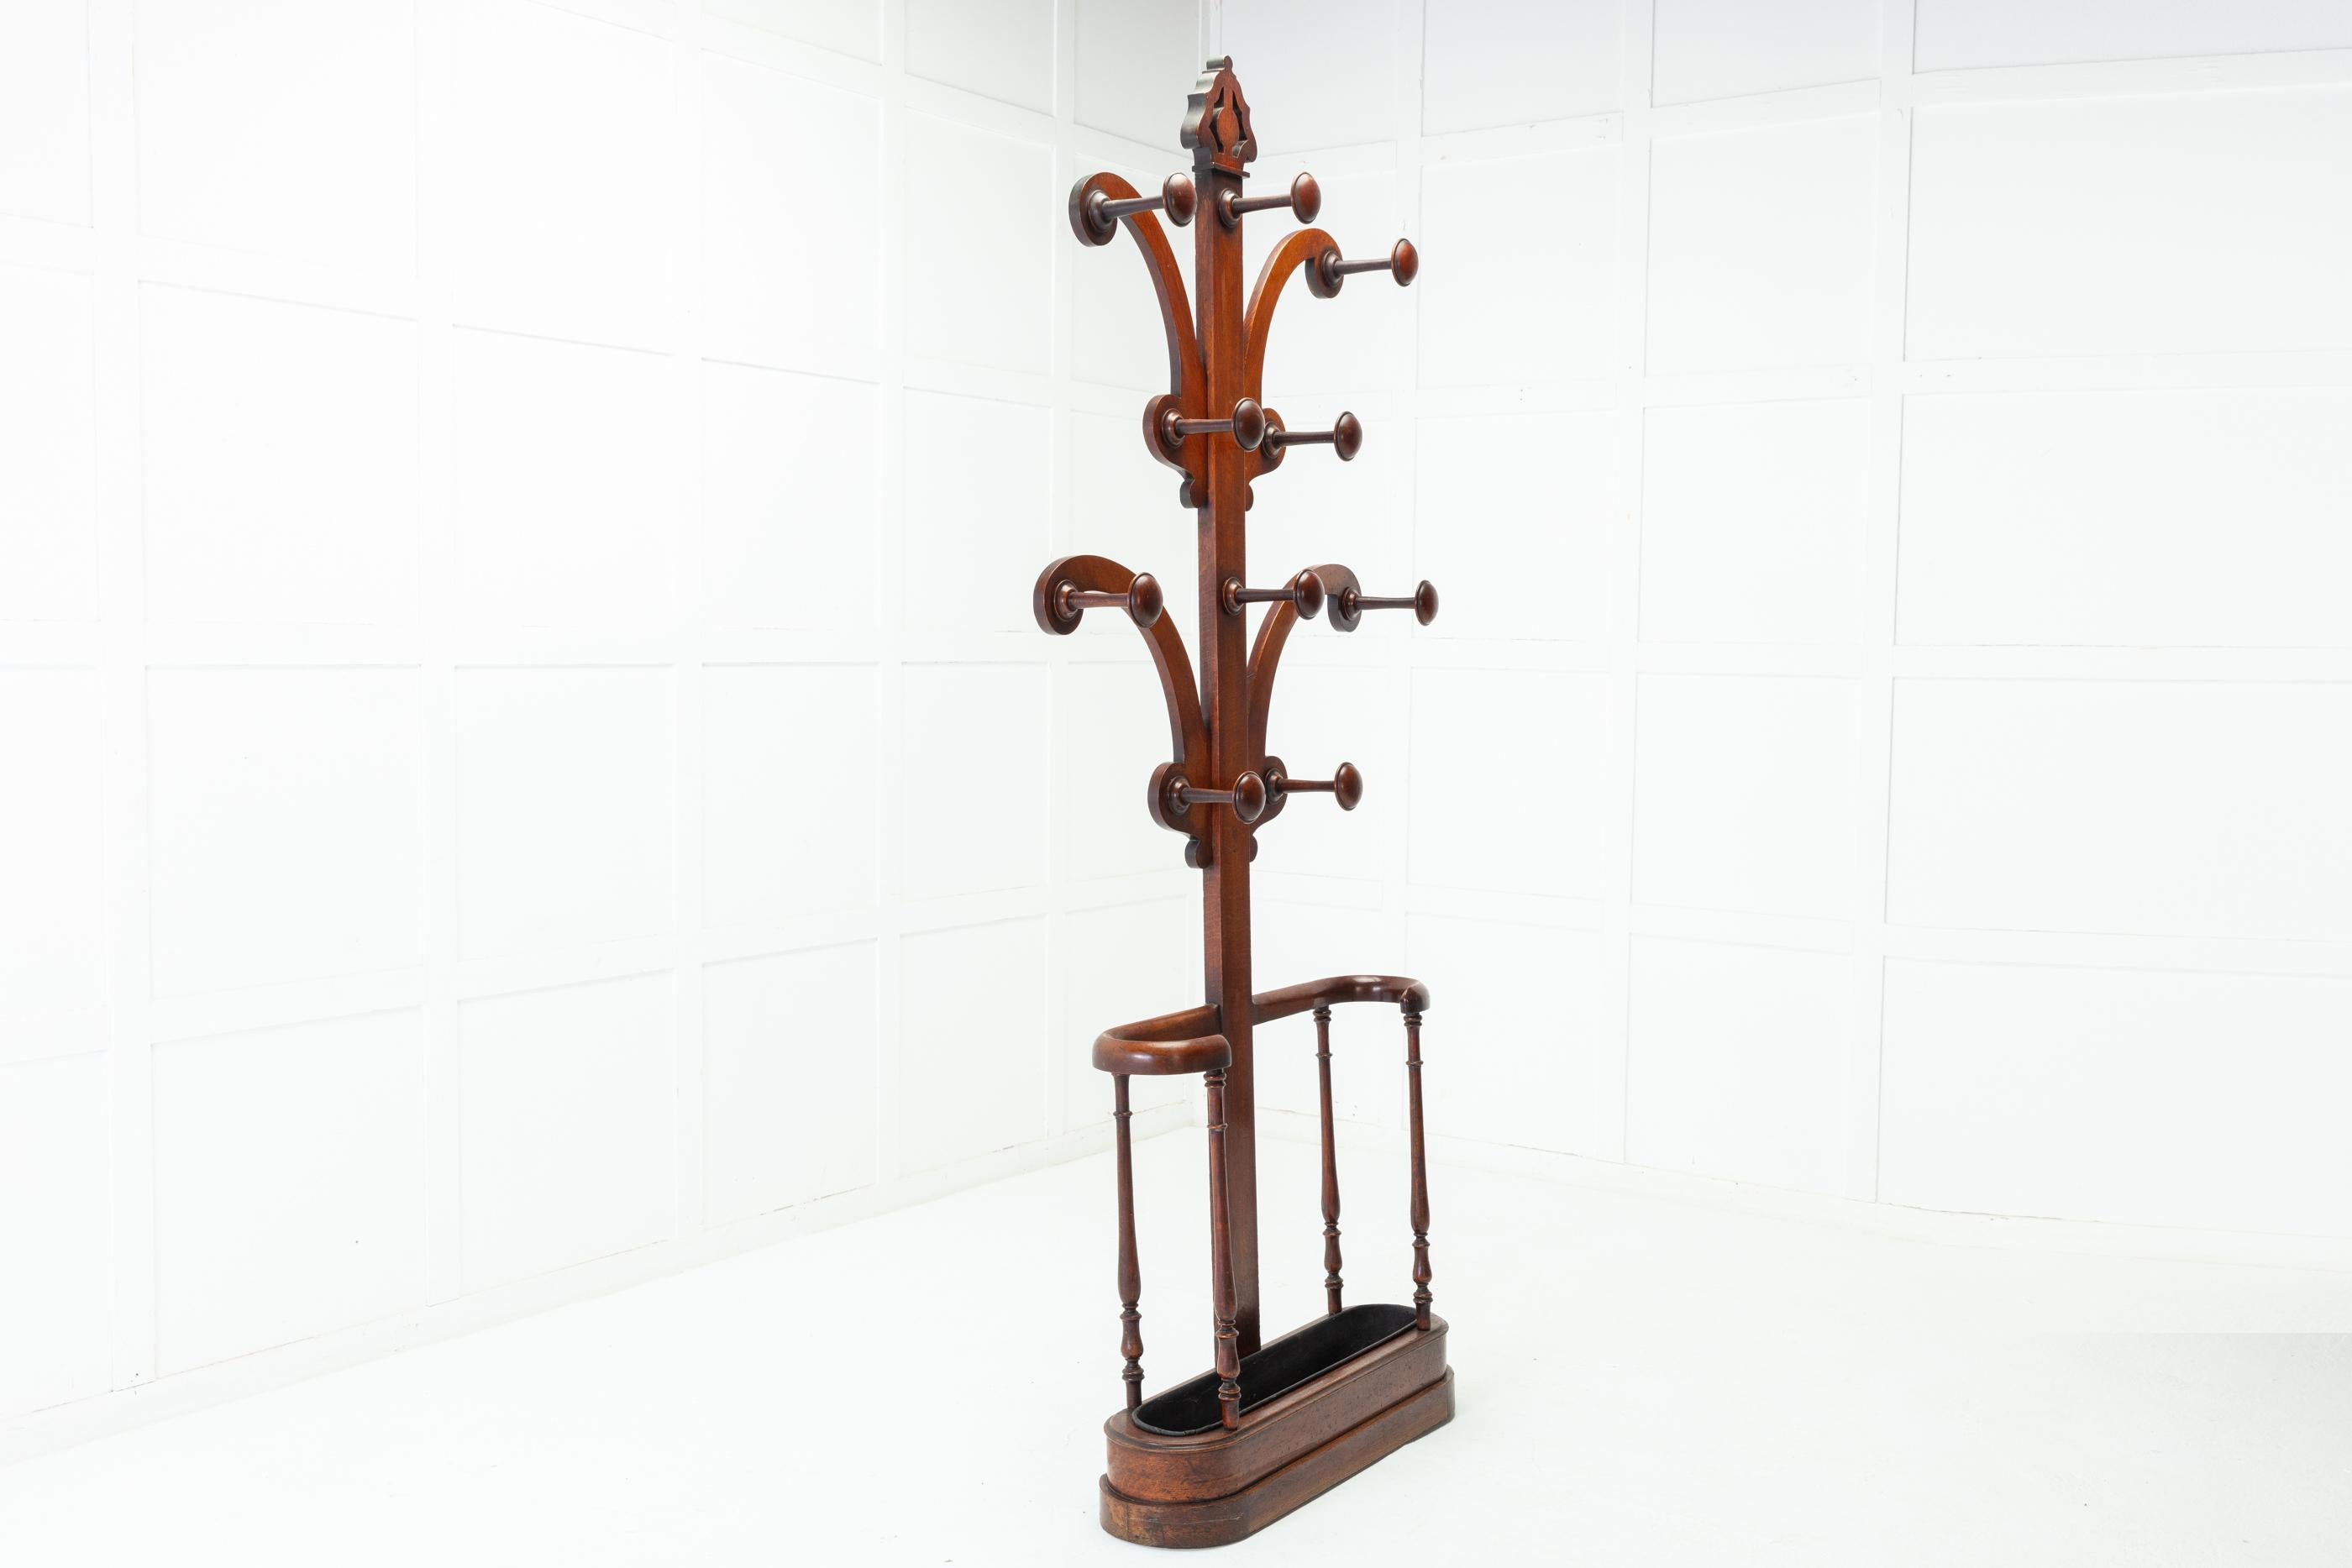 Splendid, large 19th century oak hat, coat and umbrella stand or ‘hall tree’, circa 1860.

The top is a decoratively carved finial and below are ten large, turned mushroom shaped hat or coat hooks arranged over four shaped branches. Below is the